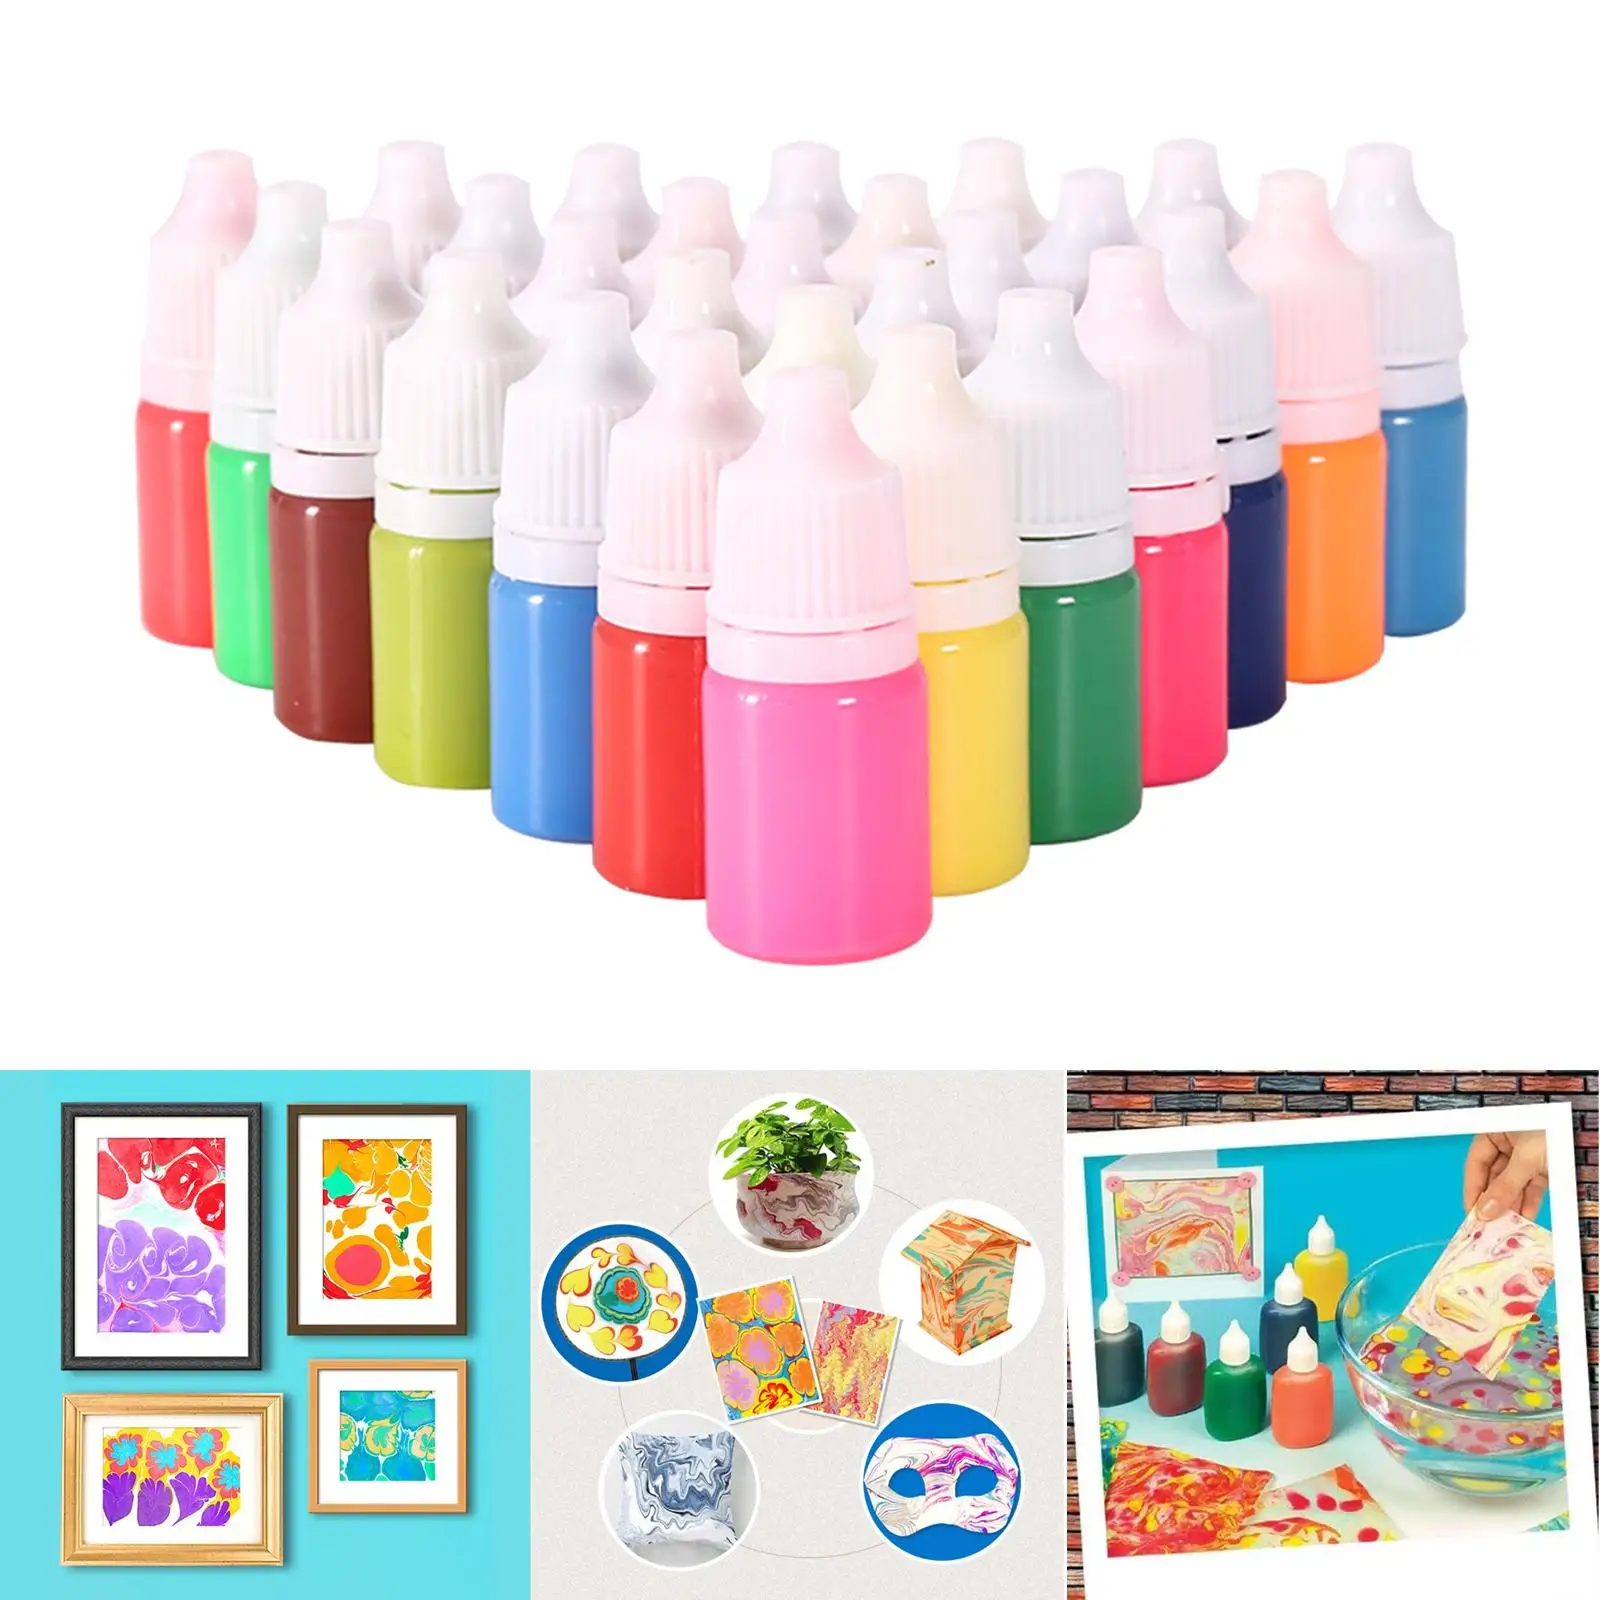 Water Painting Set Art Supplies Watercolours Art Craft 24 Tubes DIY Paint Water Drawing Set for Educational Toy Gift Children